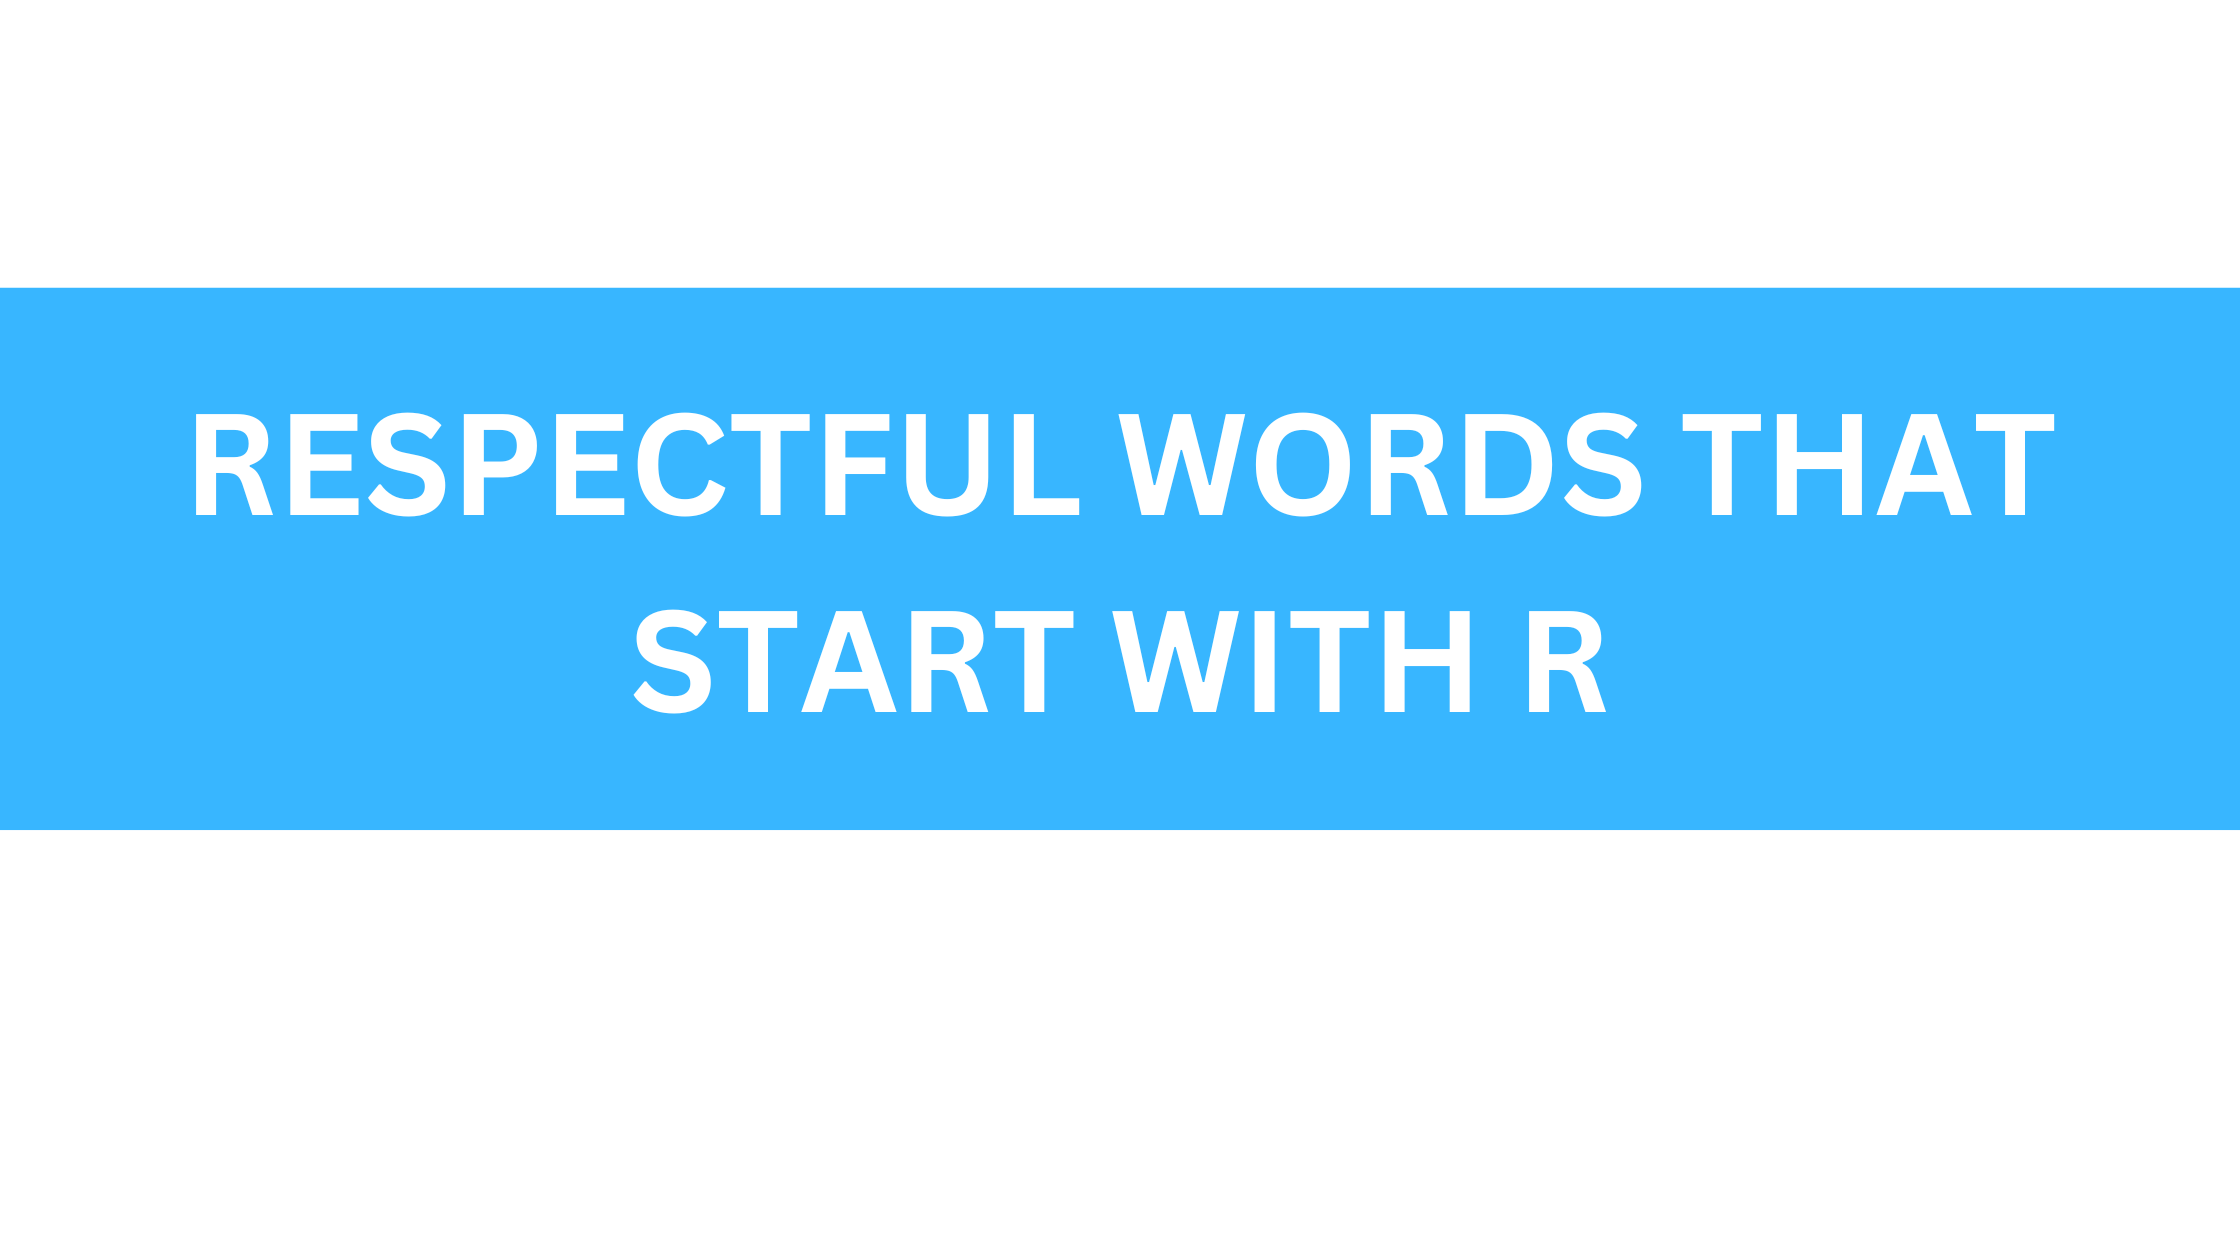 respectful words that start with r